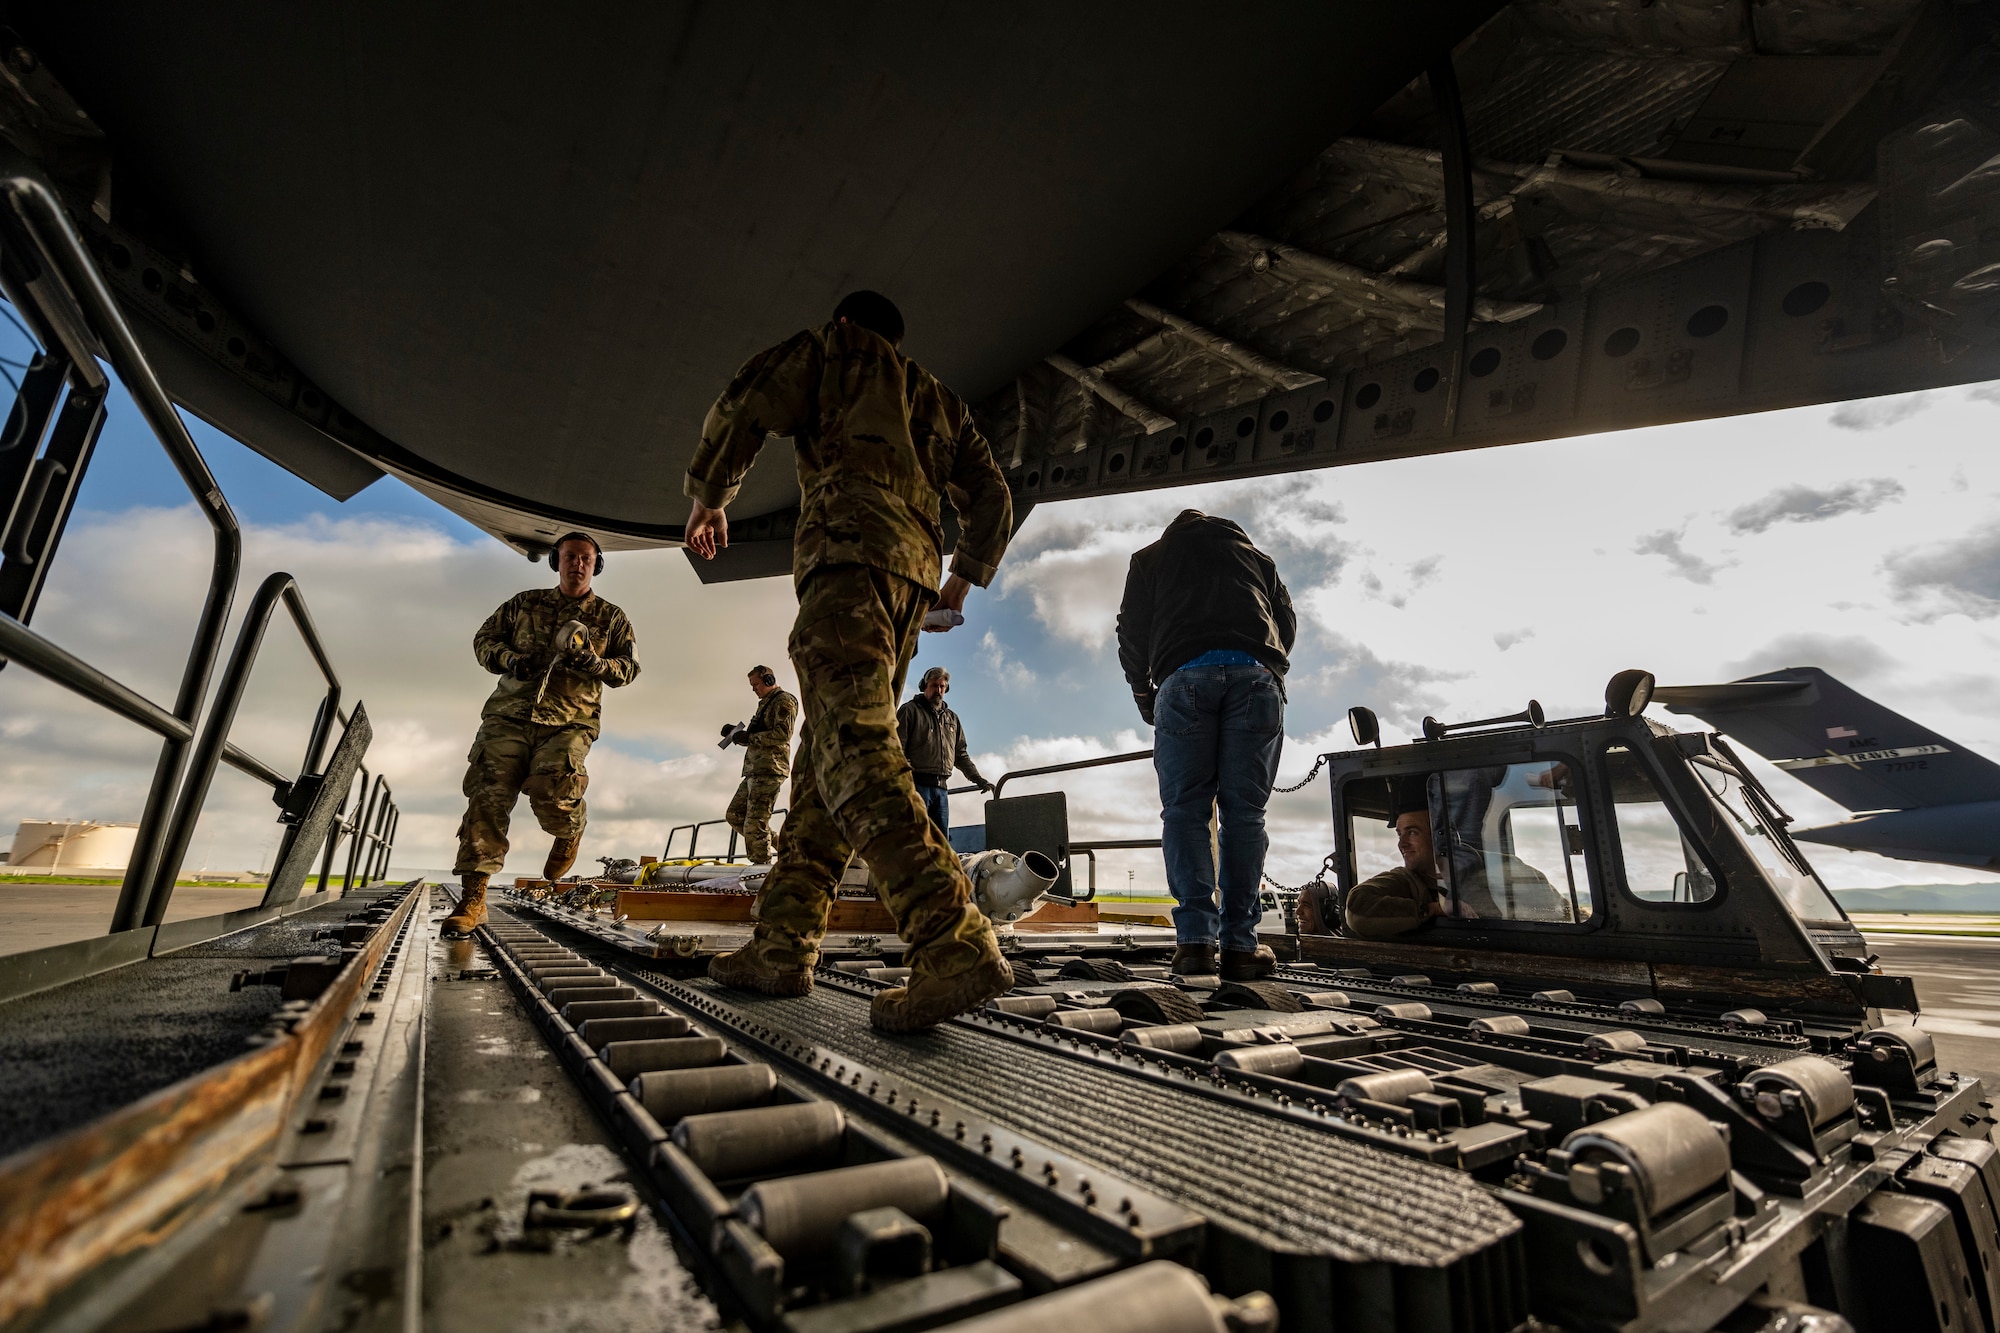 Photos of U.S. Airmen providing support to move modular carbon adsorption systems for JBPHH.